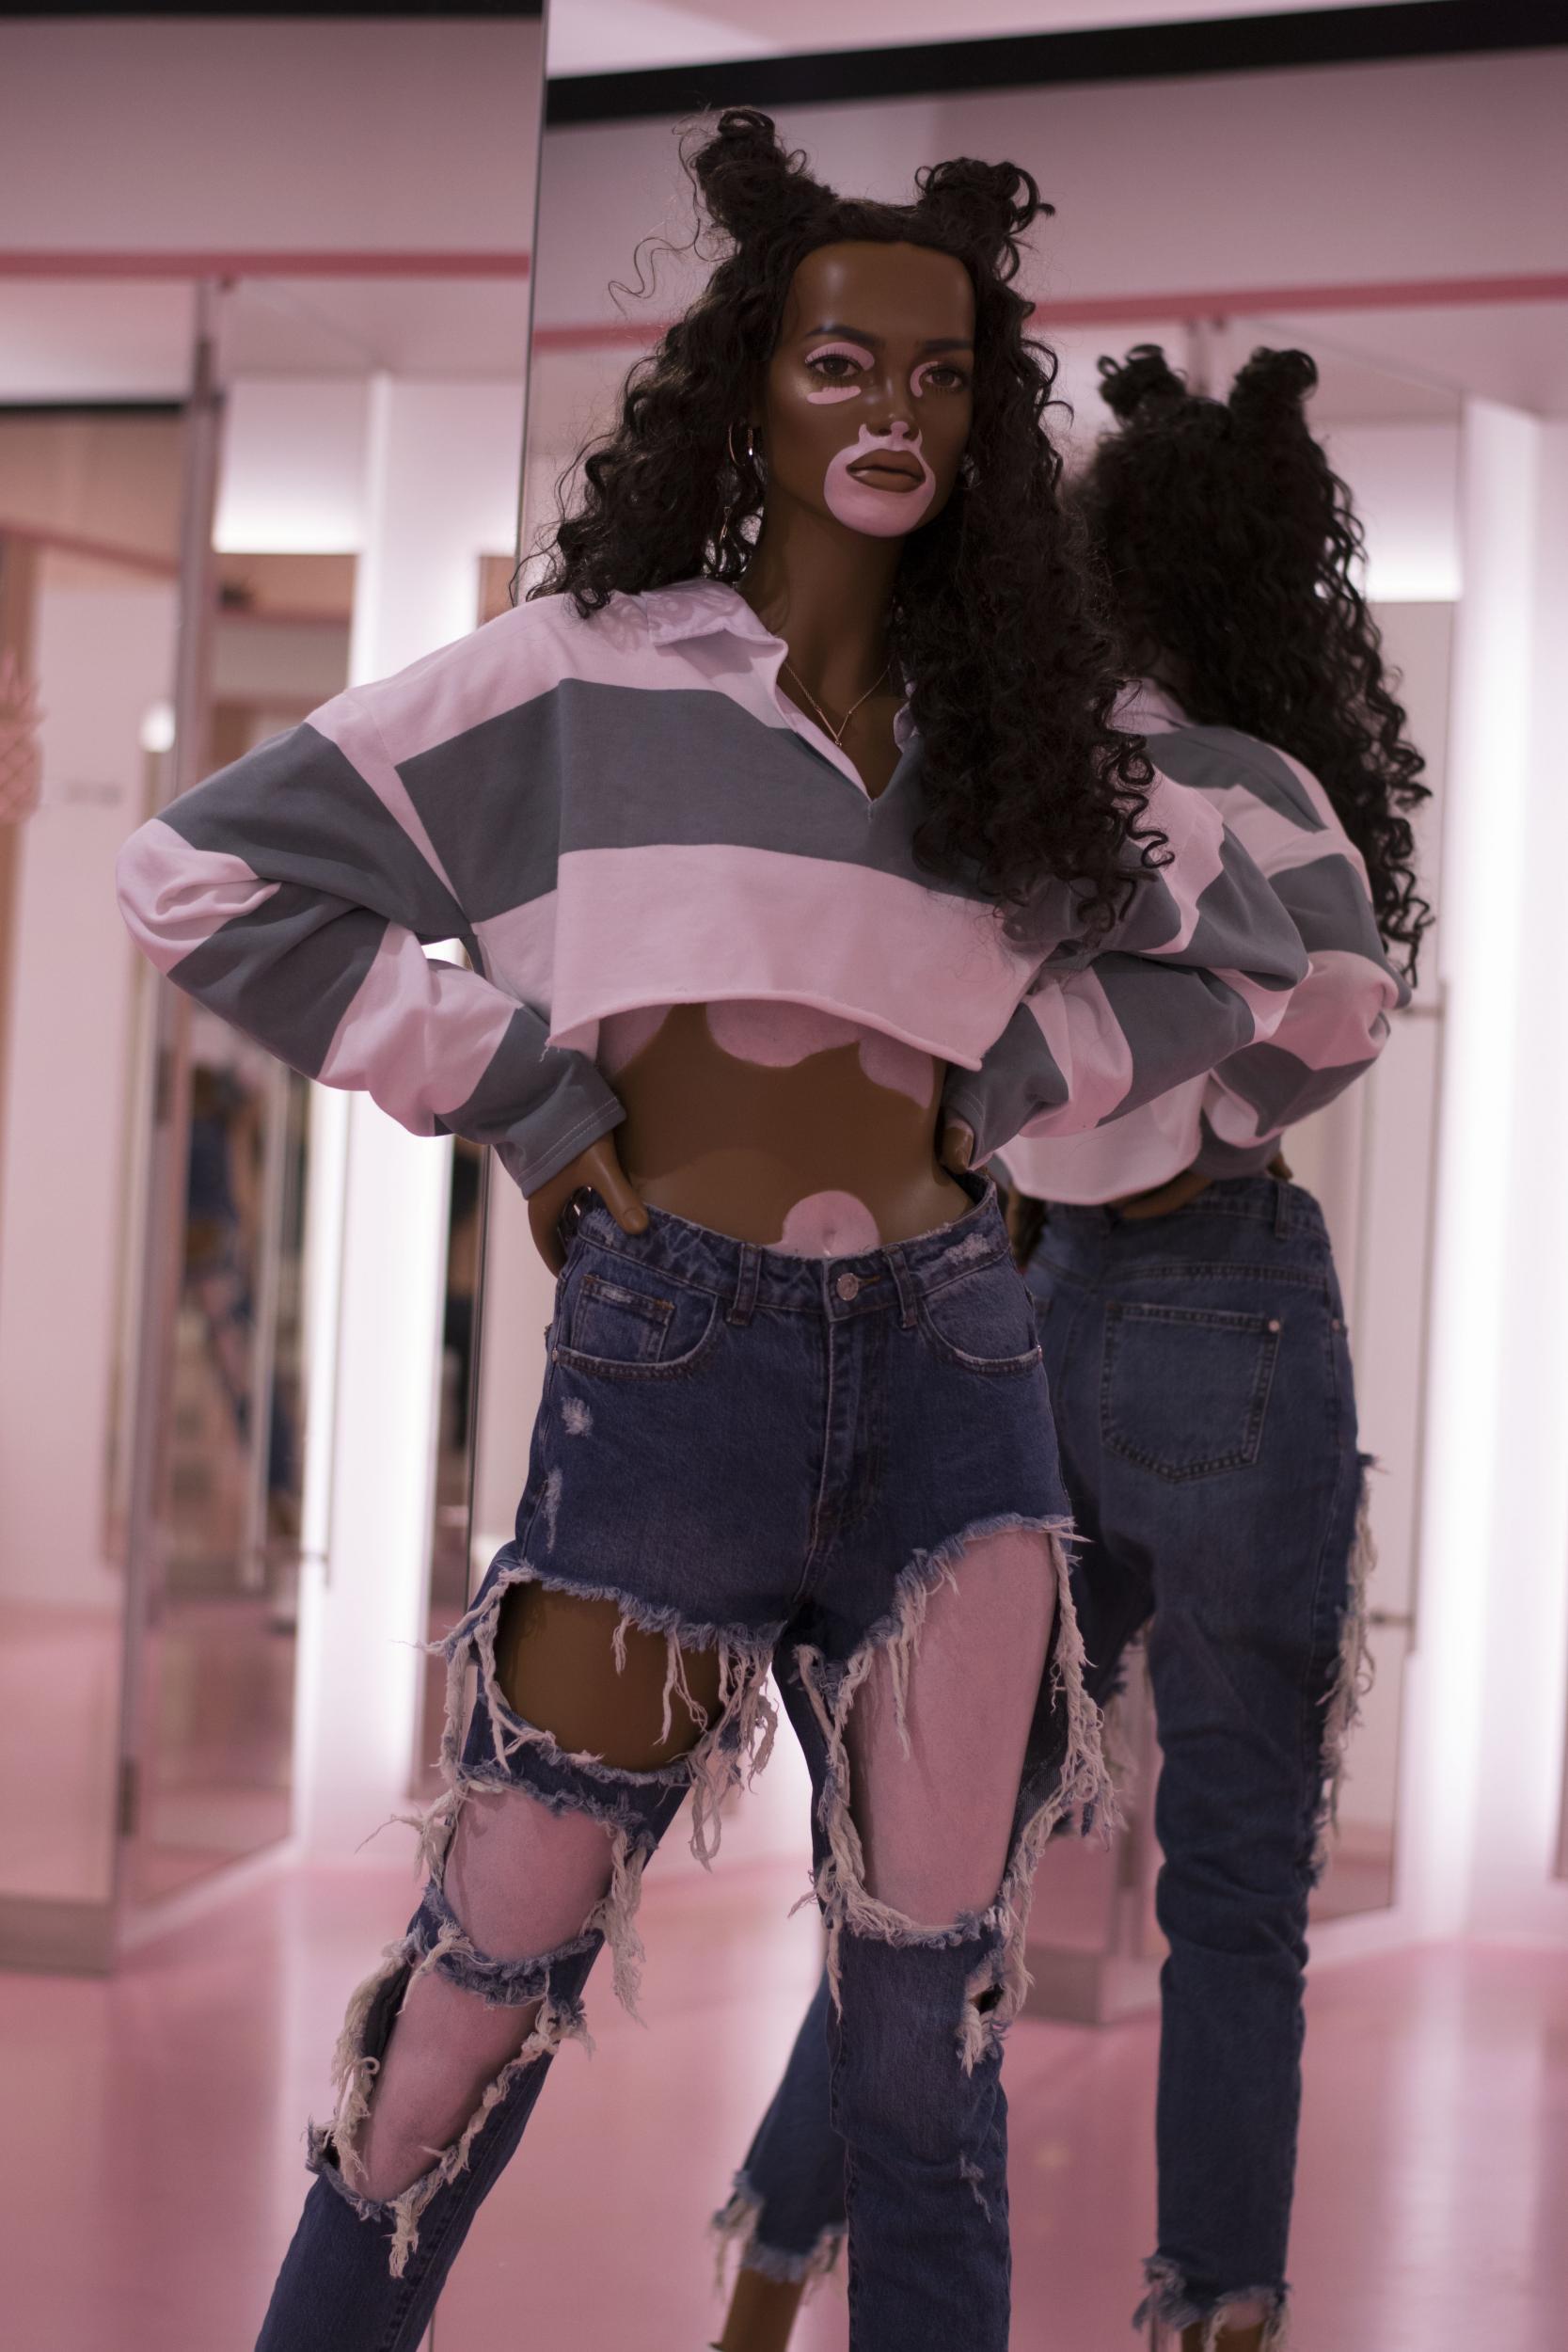 Missguided has unveiled a new diverse range of mannequins being displayed in their two stores